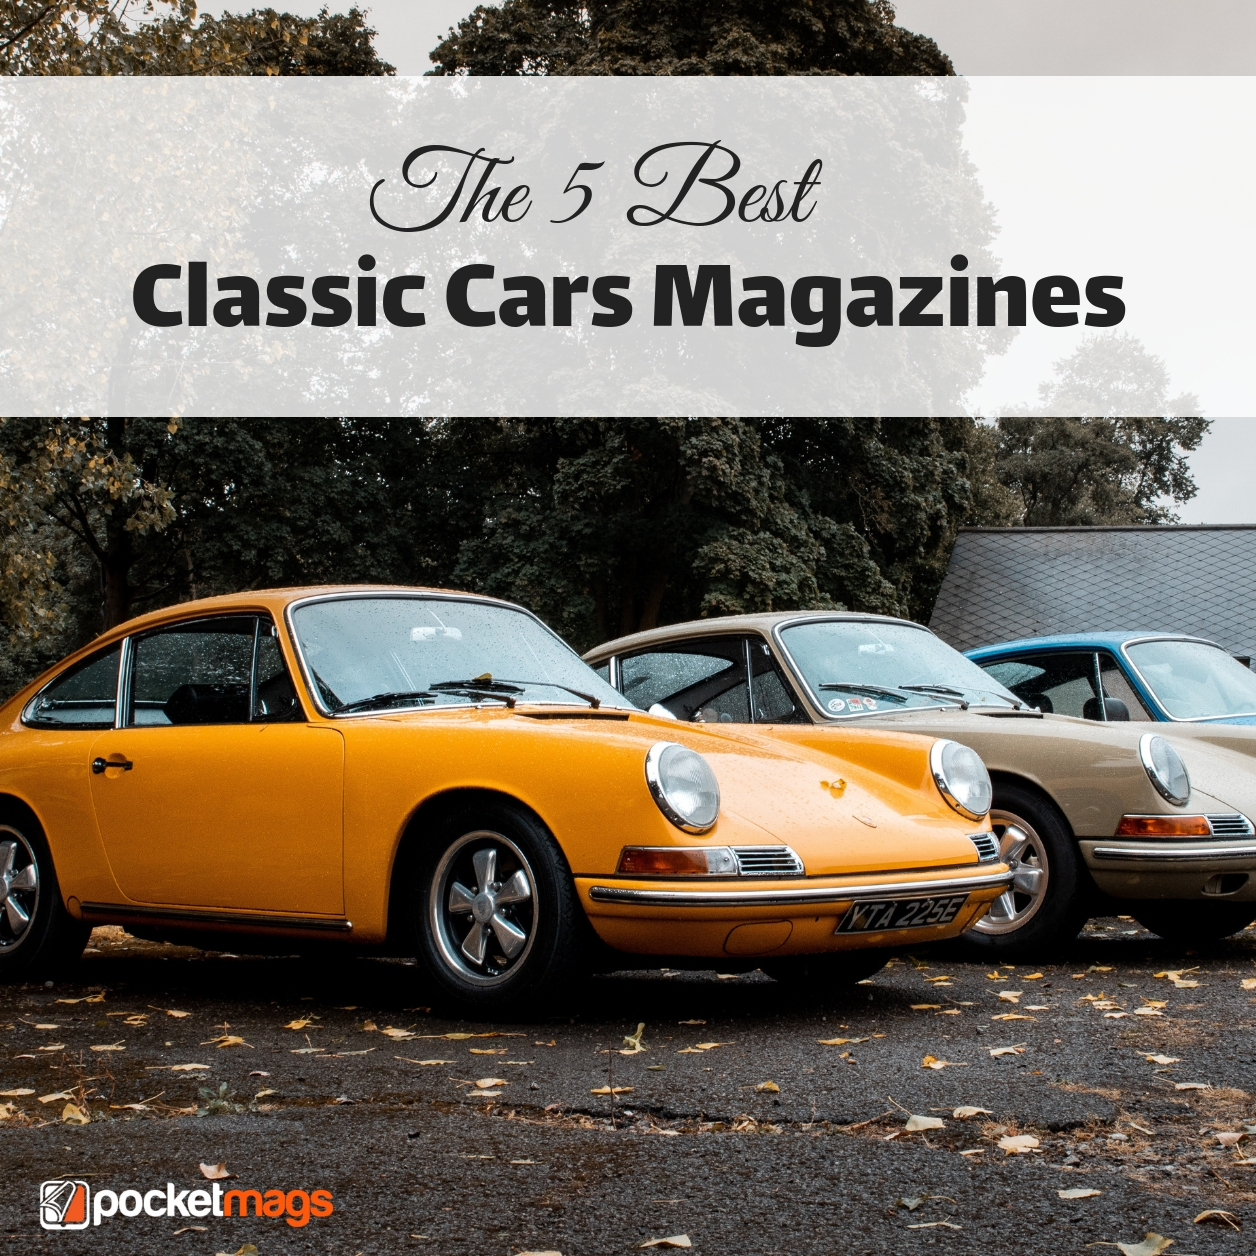 The 5 Best Classic Cars Magazines